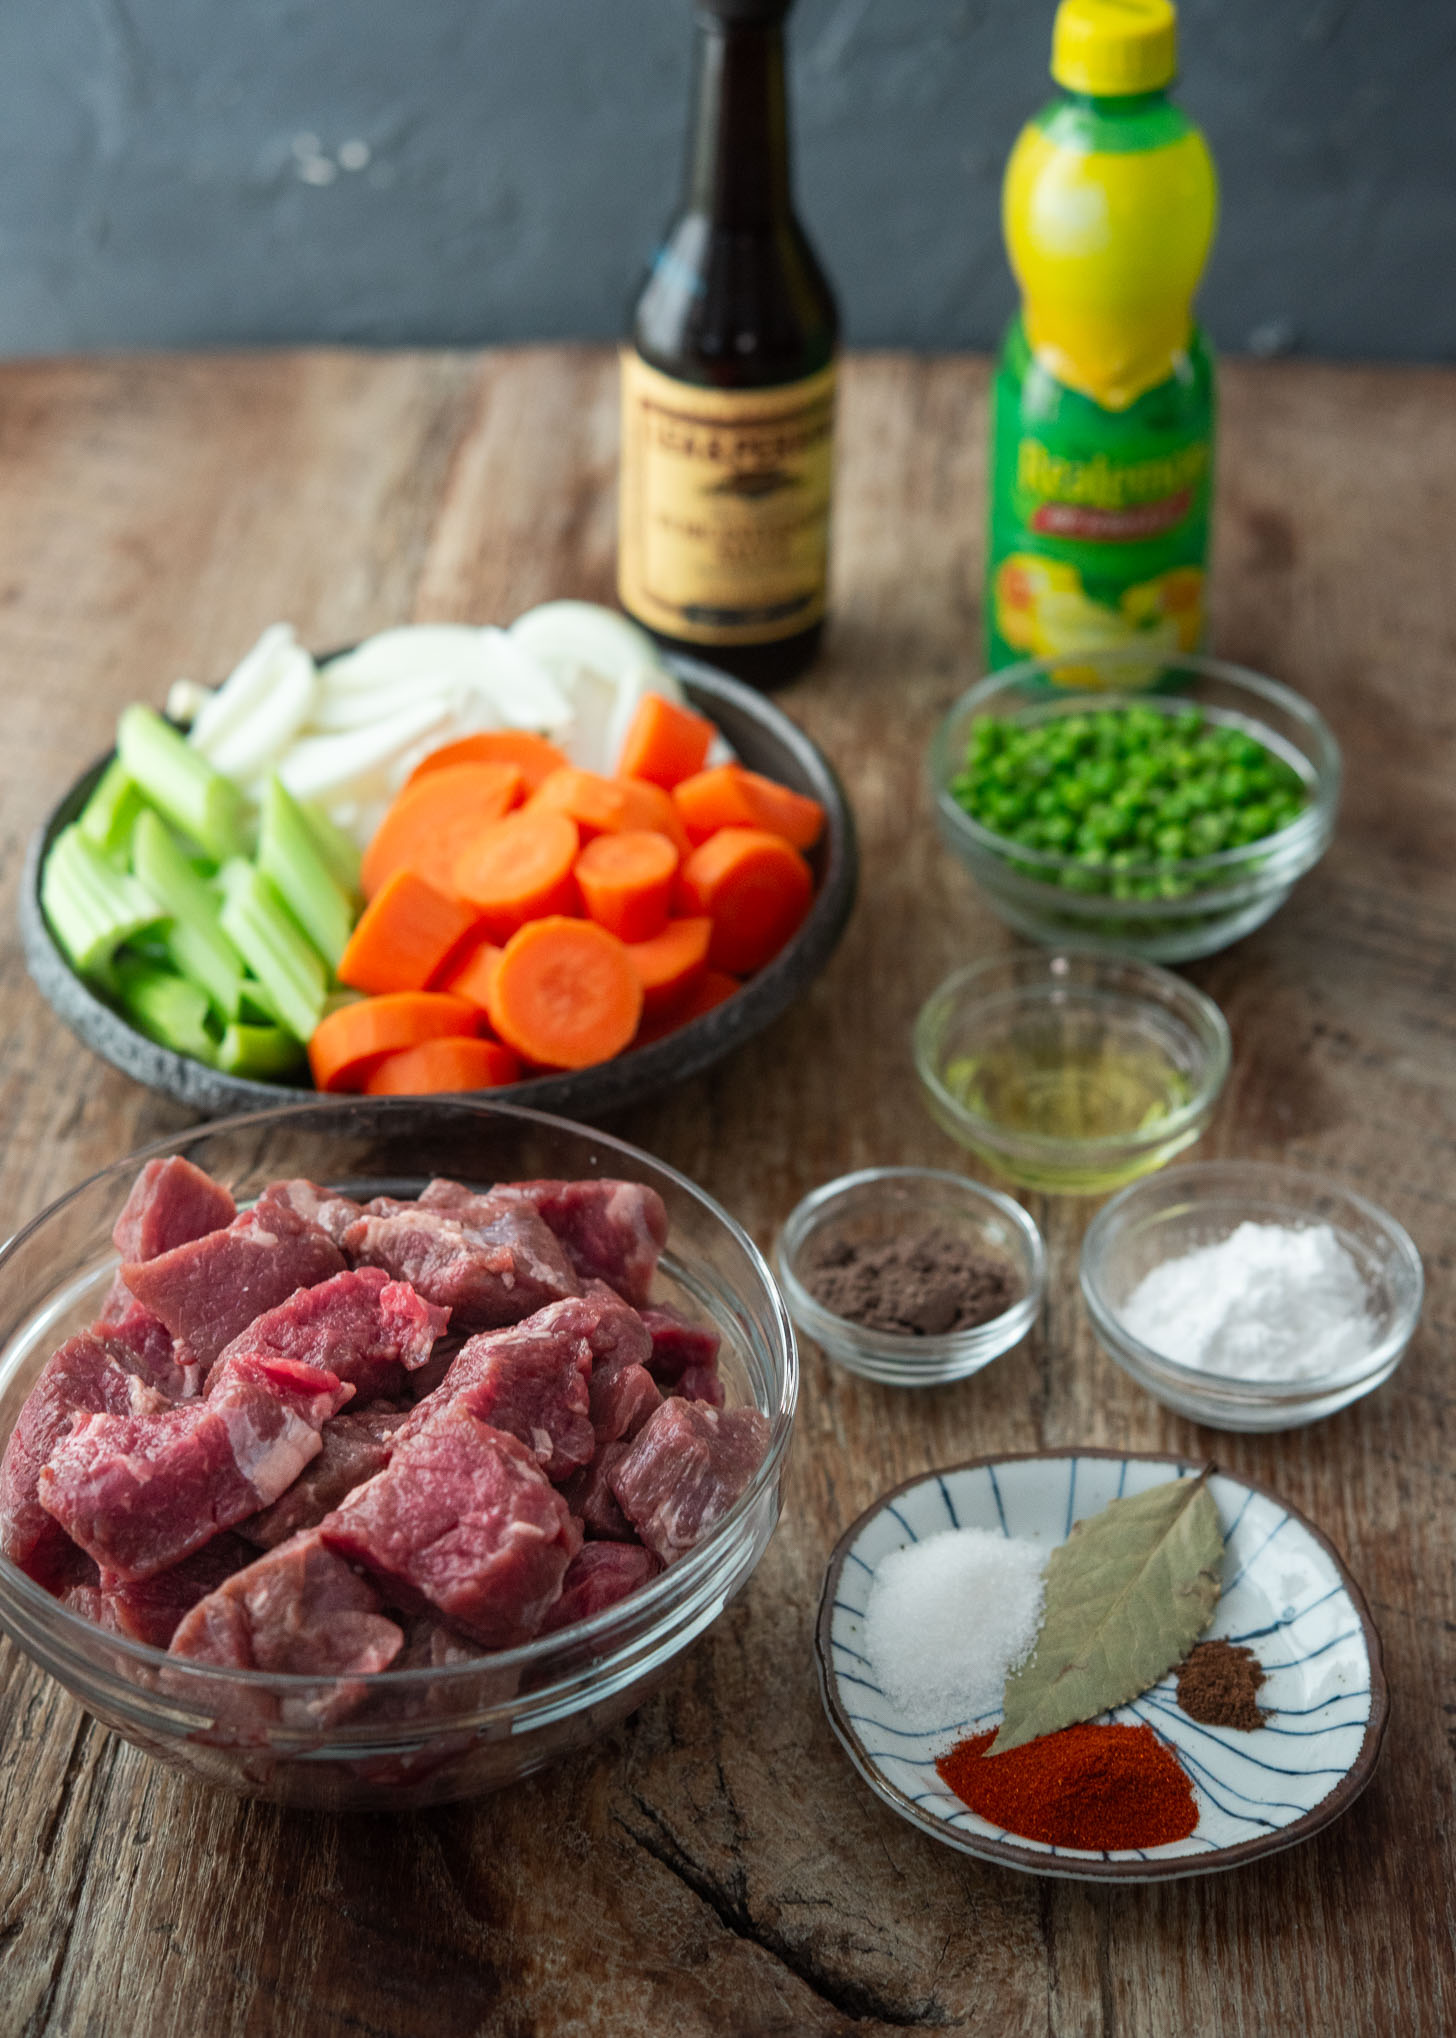 Recipe Ingredients for making old time beef stew.